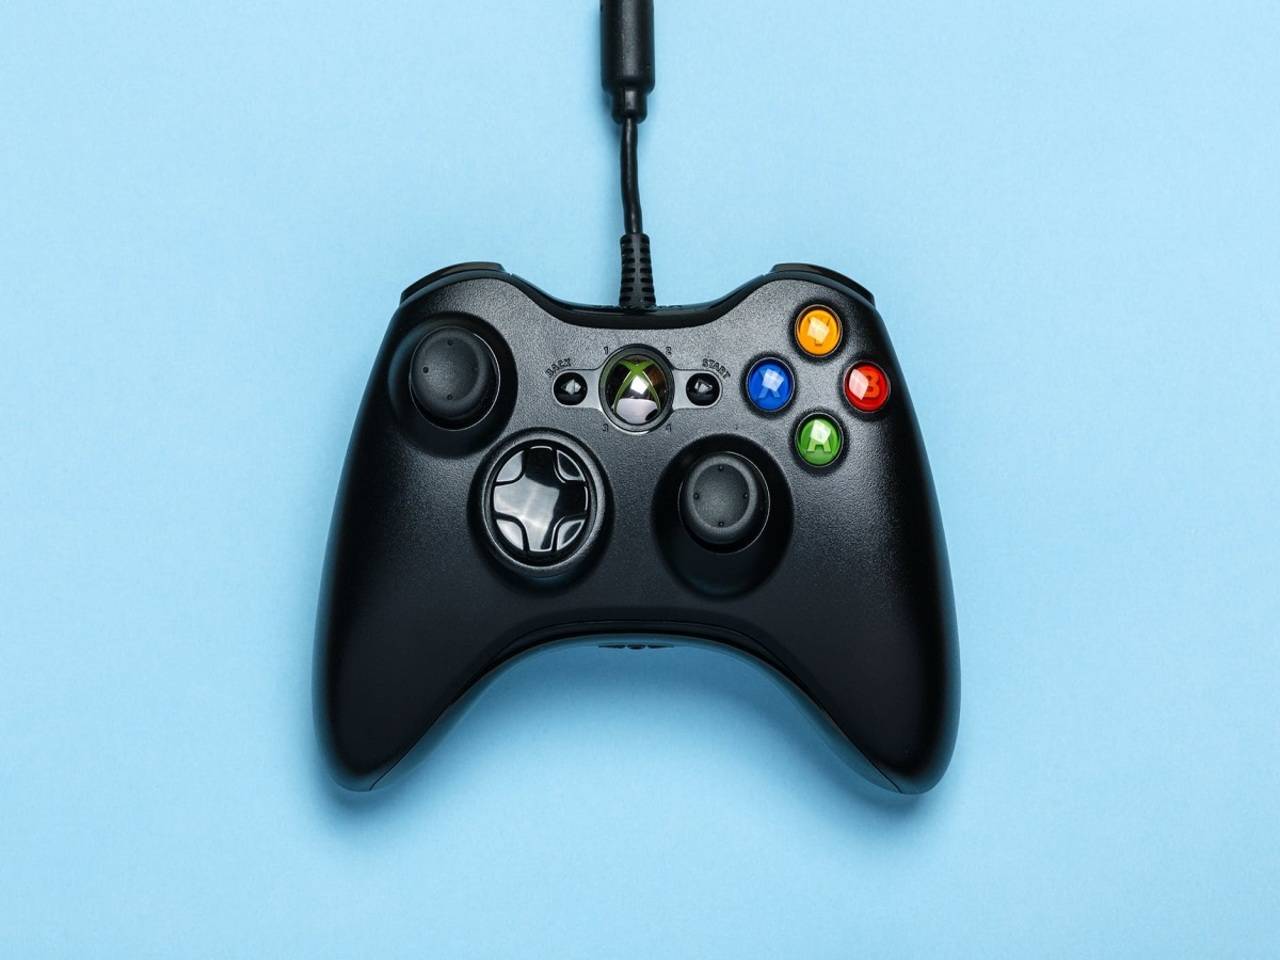 Microsoft Xbox One X Controller: Gaming Controllers For Microsoft Xbox One X, Xbox 360, Xbox One, and Xbox S Consoles | - Times of India